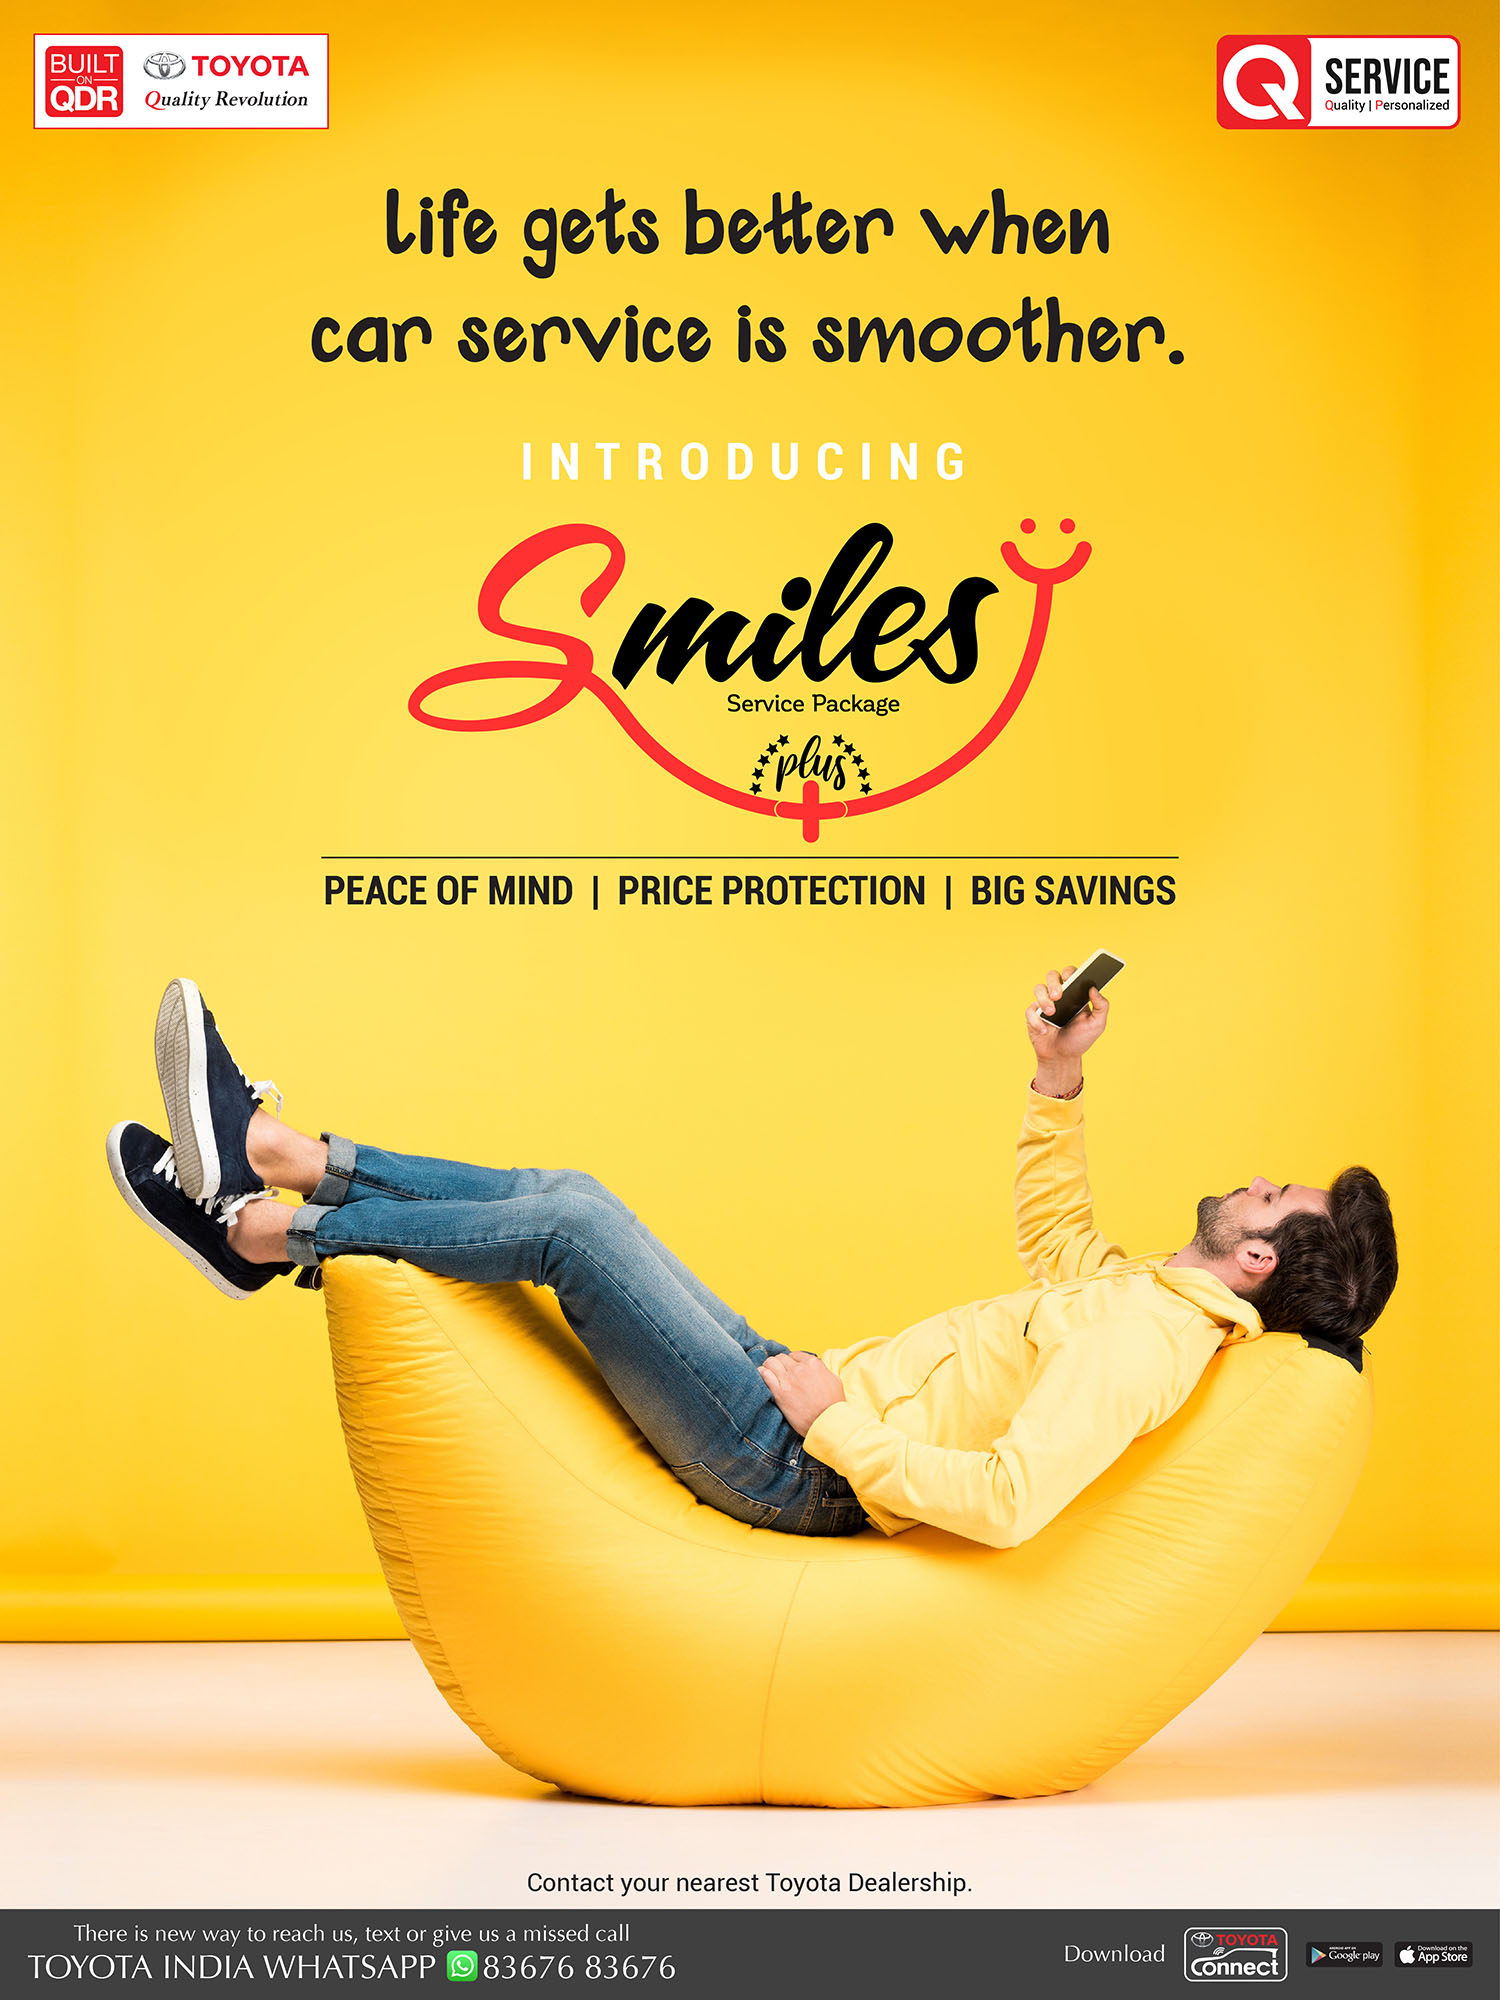 Toyota Kirloskar Motor launches all-new pre-paid service package- Smiles Plus